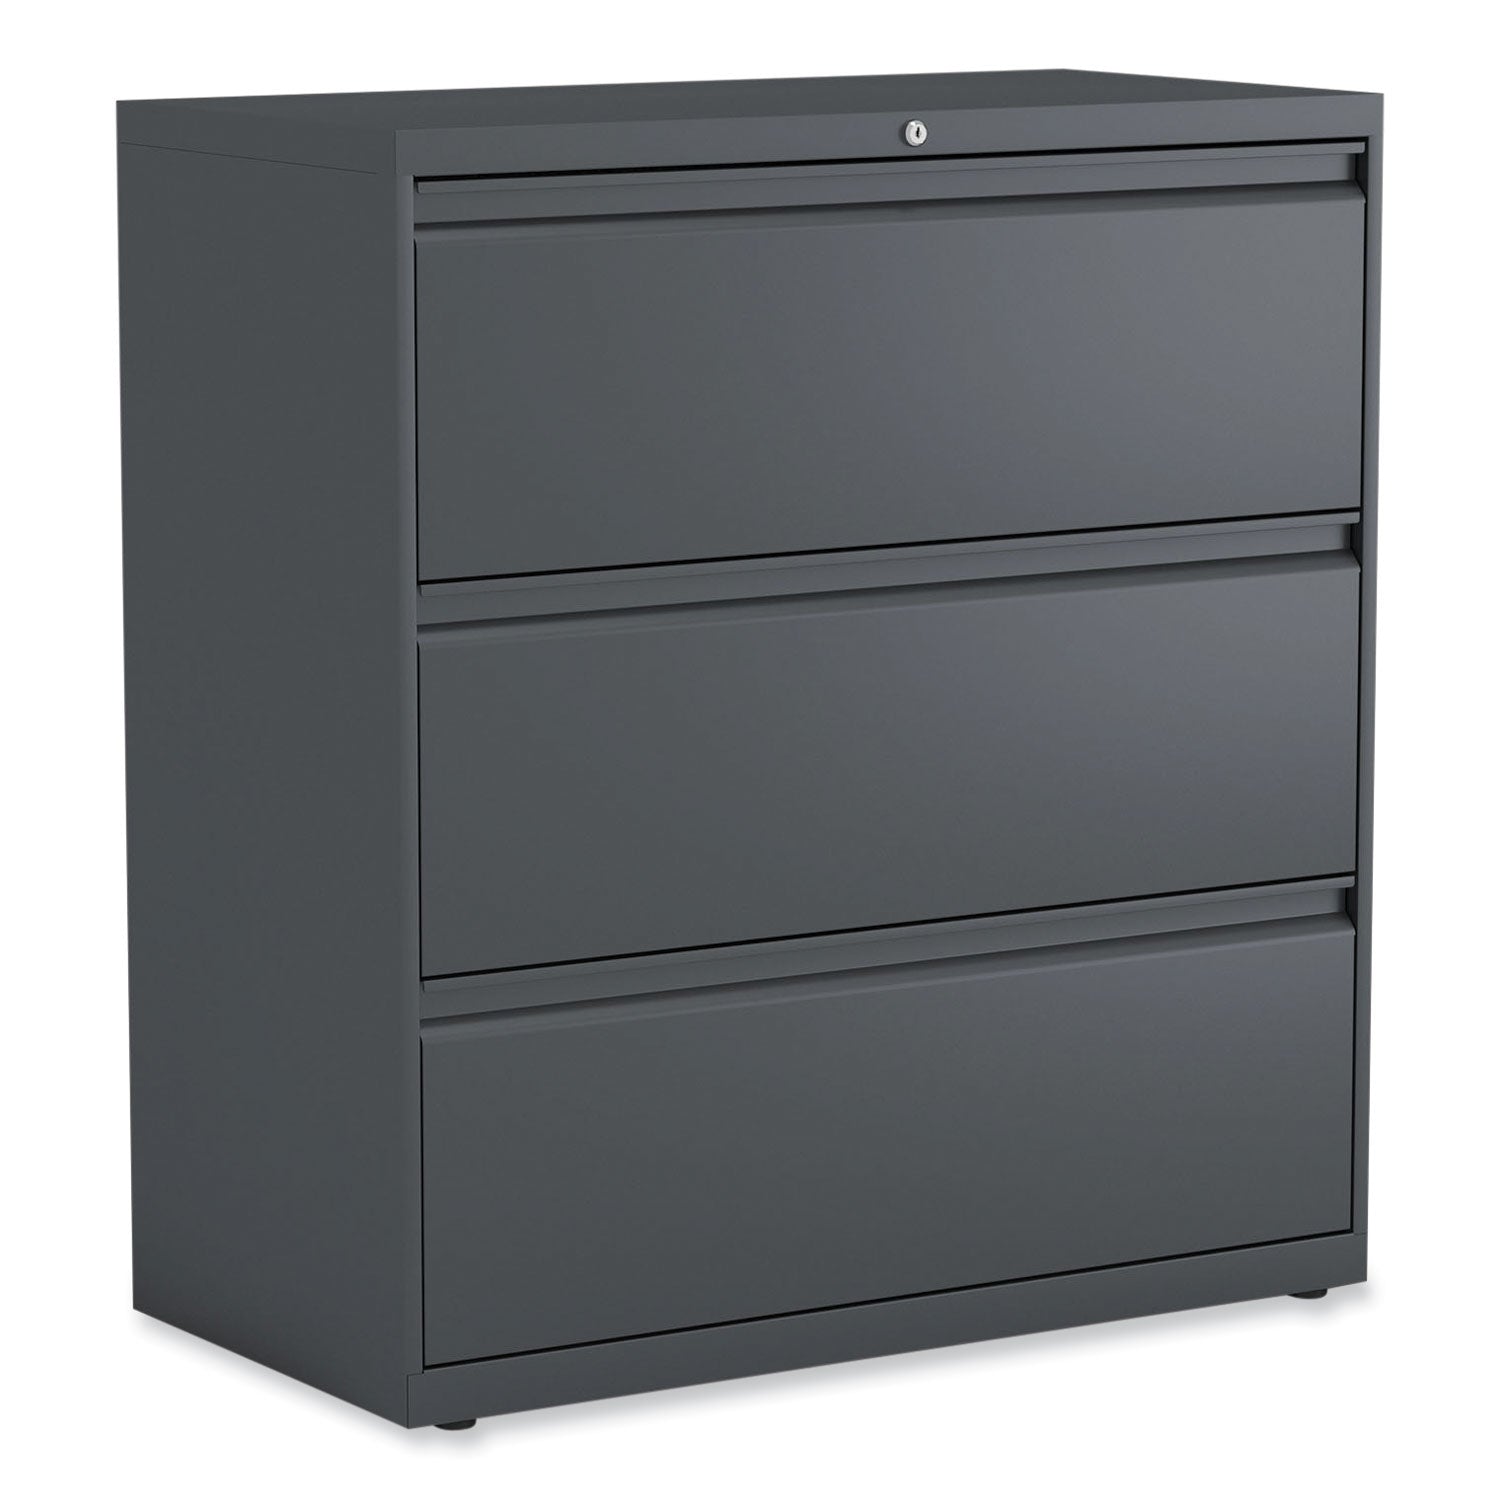 lateral-file-3-legal-letter-a4-a5-size-file-drawers-charcoal-36-x-1863-x-4025_alehlf3641cc - 1